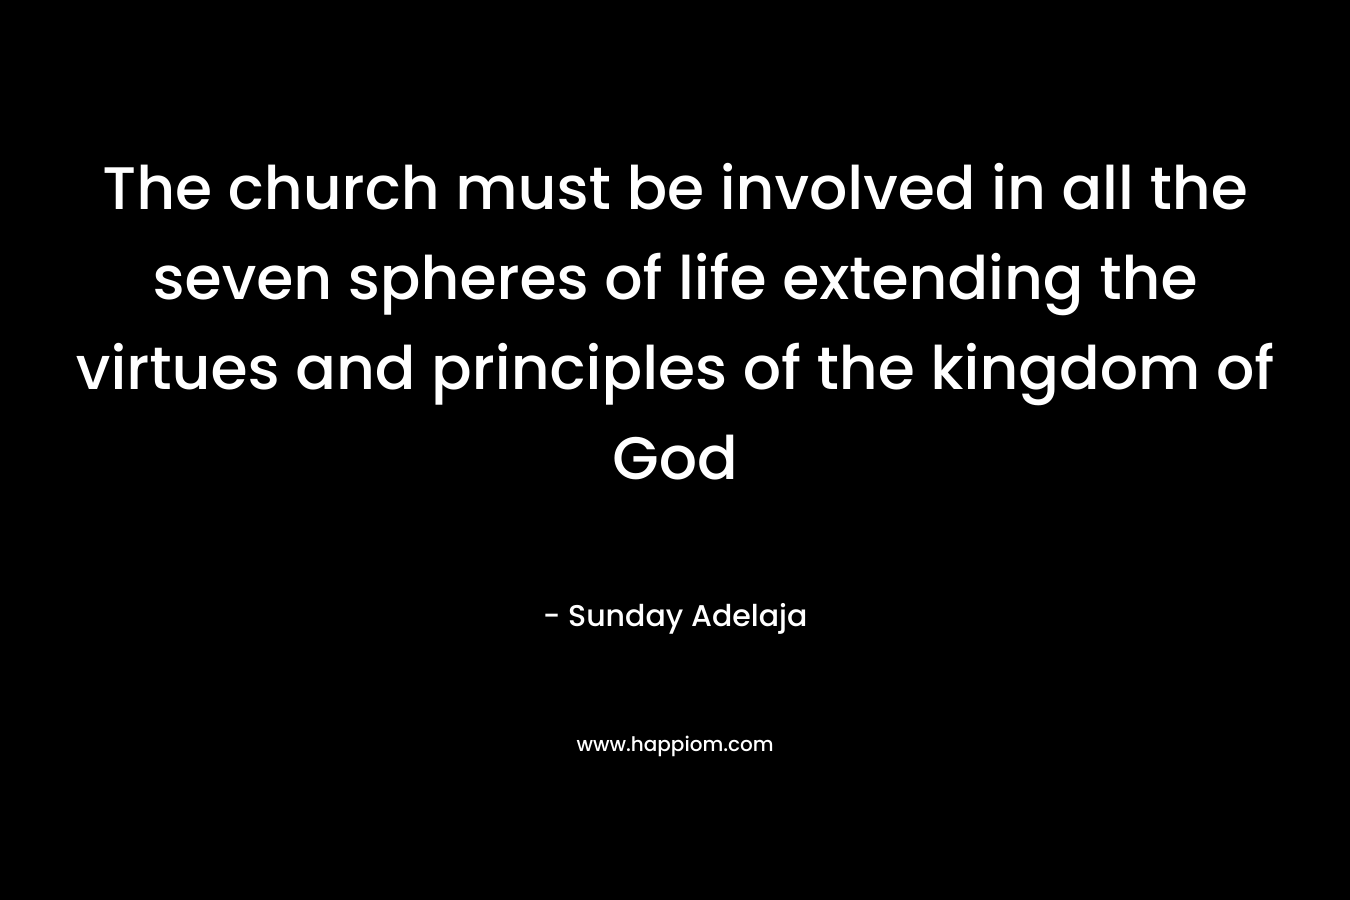 The church must be involved in all the seven spheres of life extending the virtues and principles of the kingdom of God